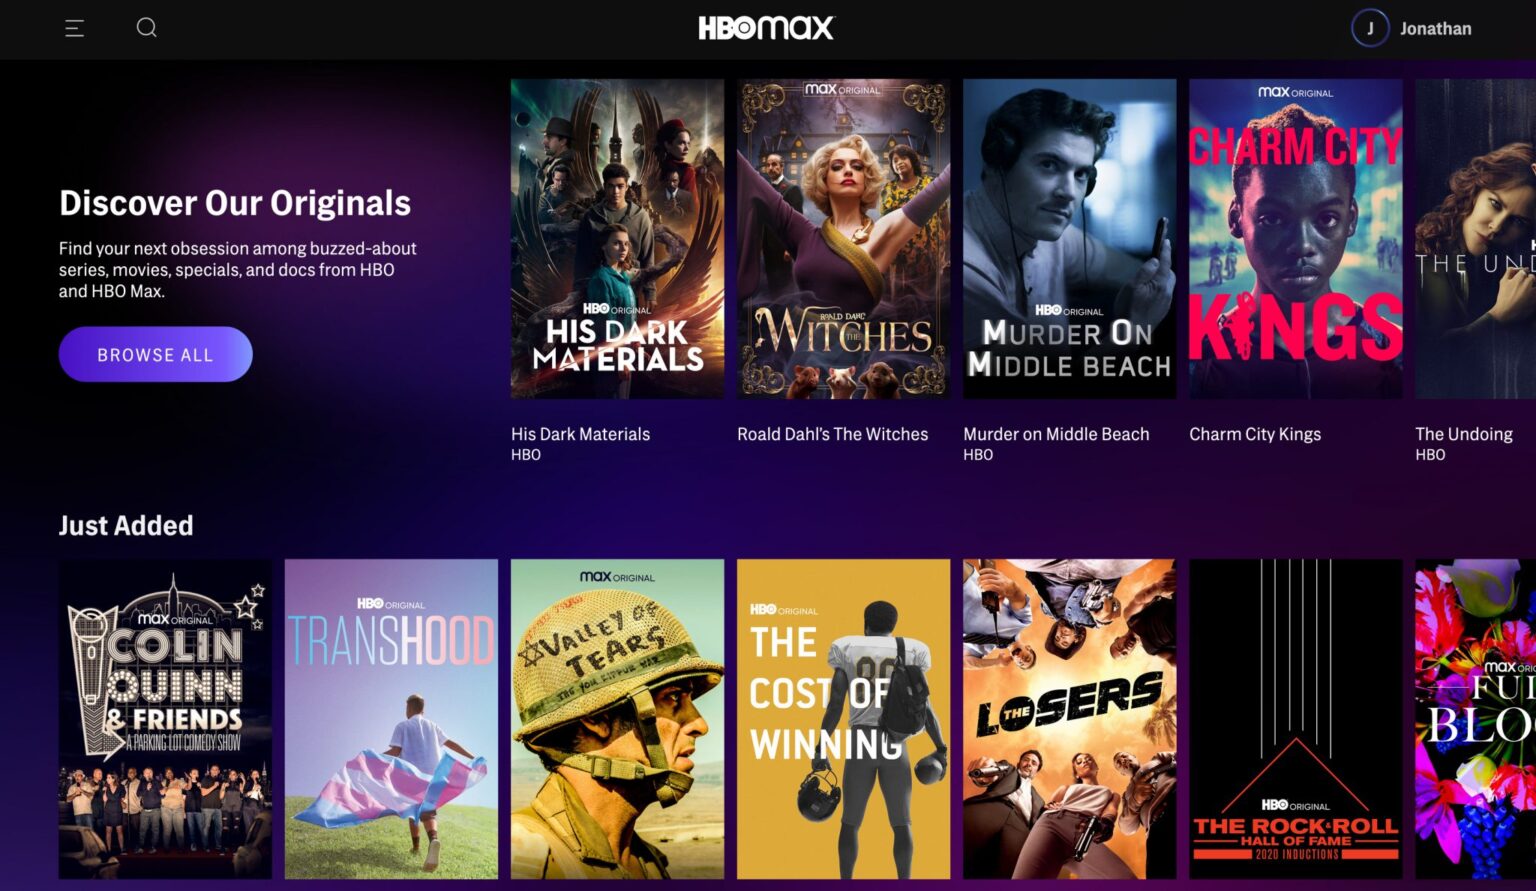 HBO Max has some incredible content available for its subscribers, making the price worth it. Find out why by browsing our favorites on the platform.